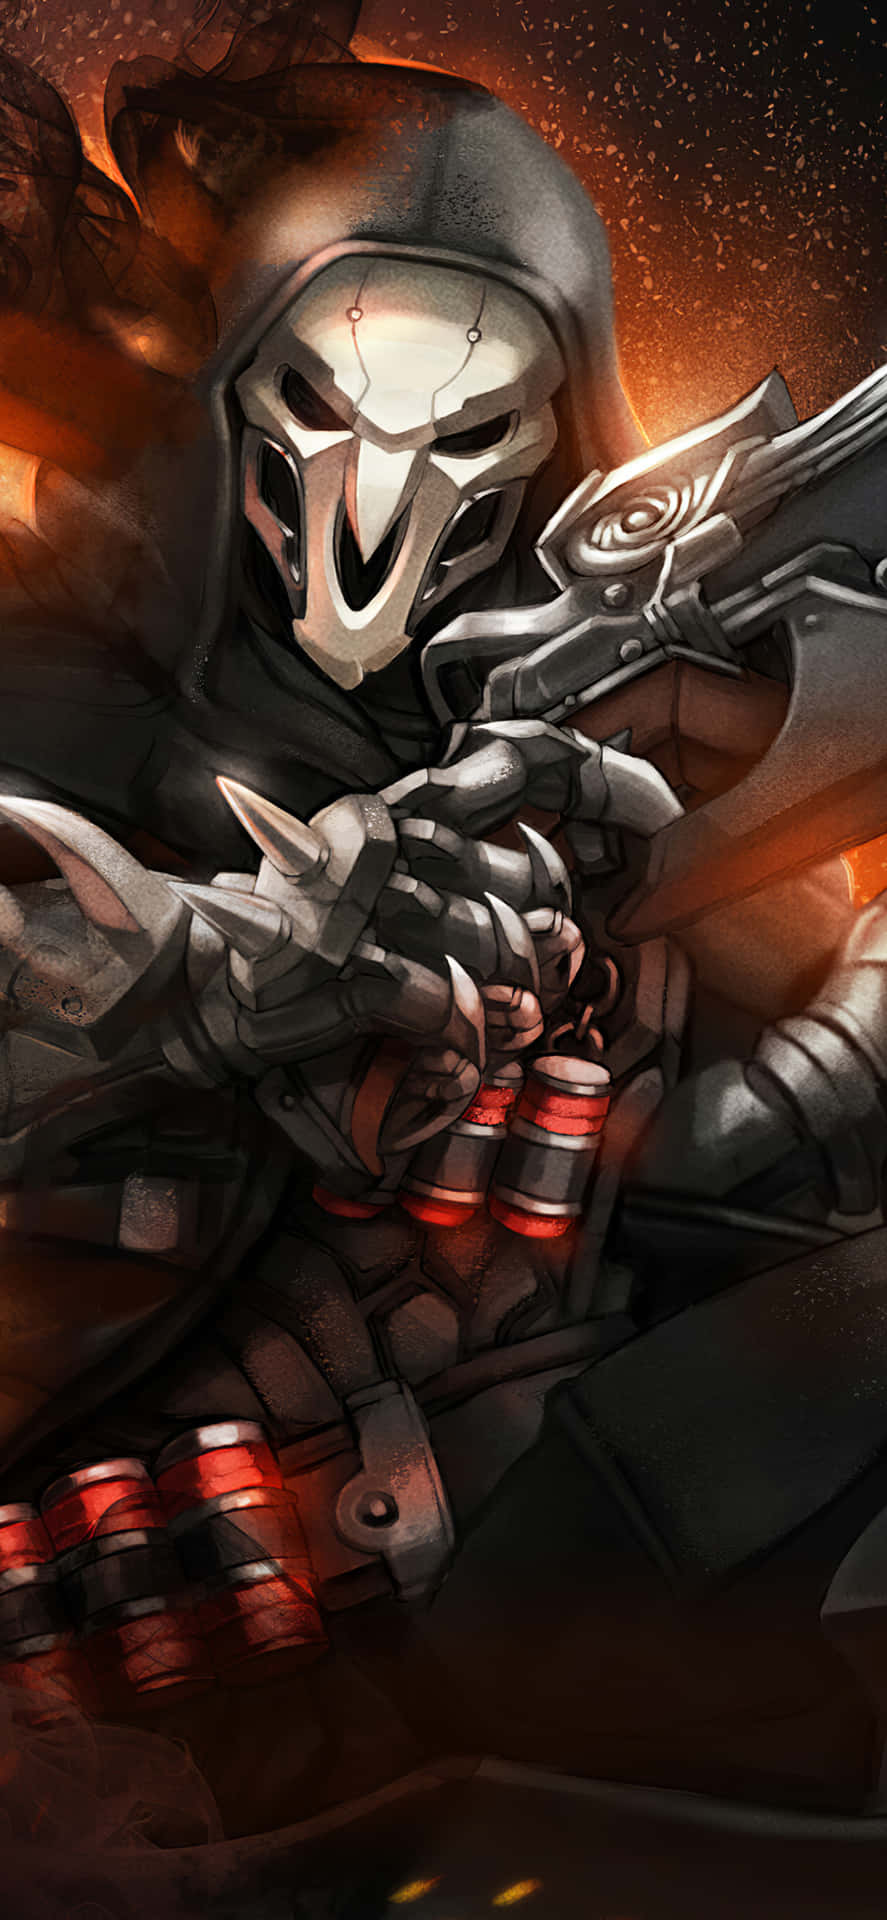 Iphone Xs Max Overwatch Background Reaper With His Guns Background